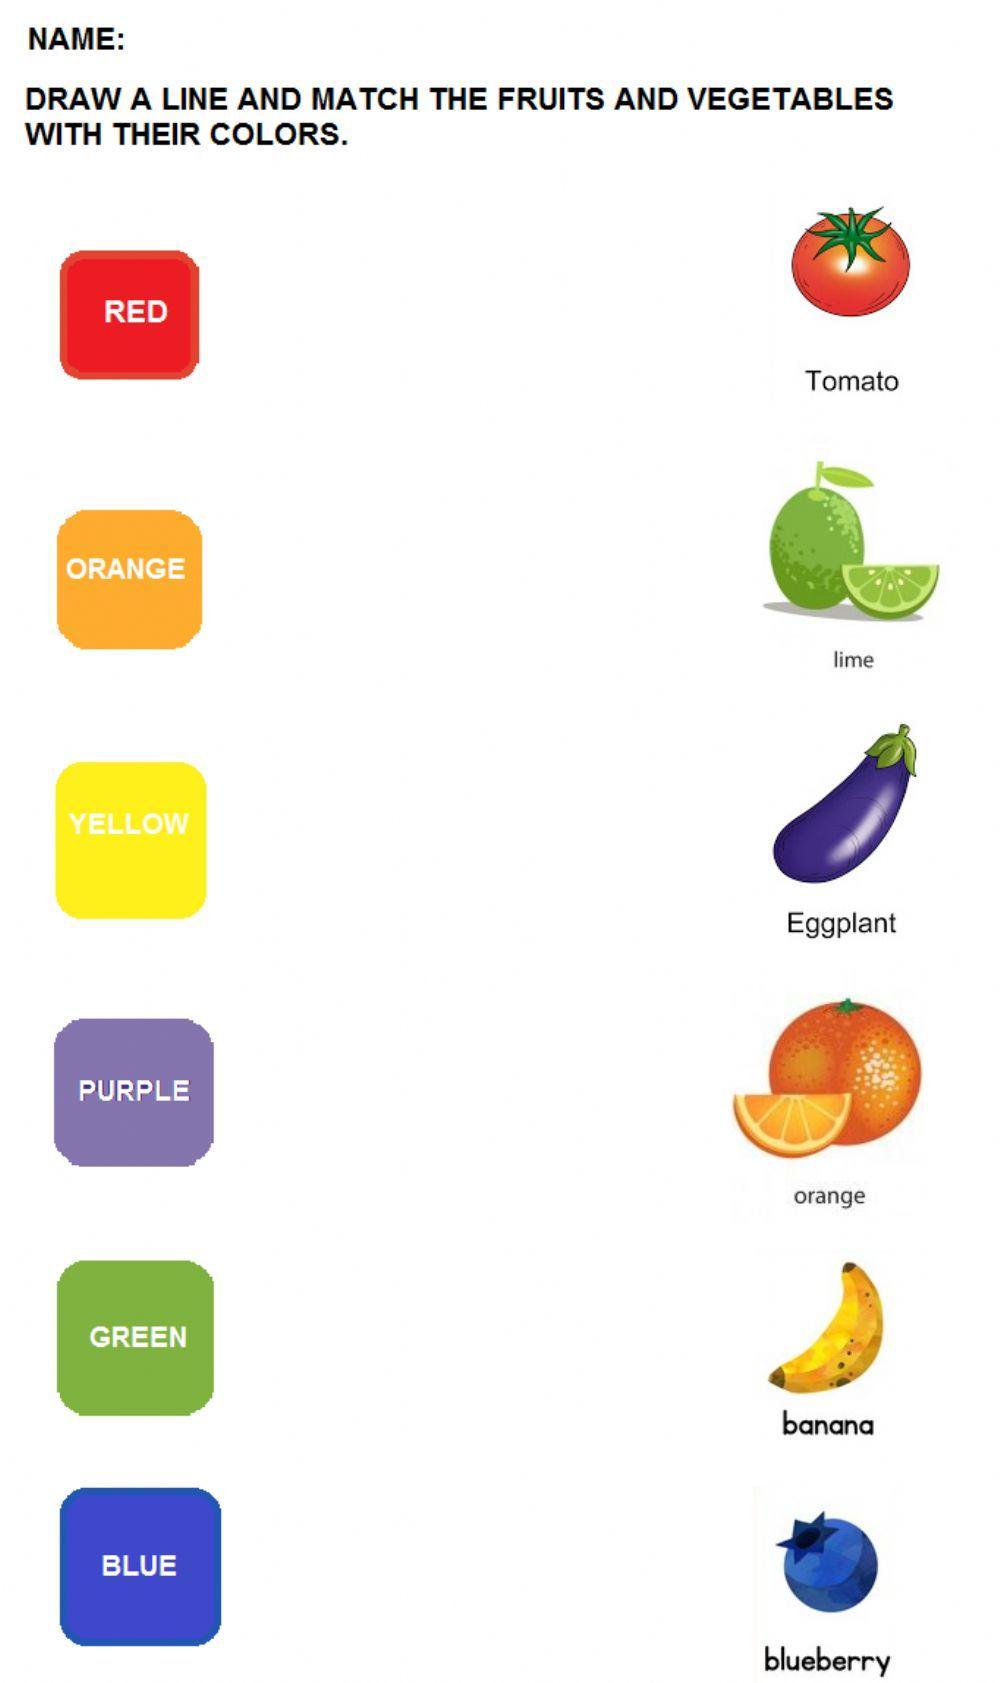 Match the colors with the fruits